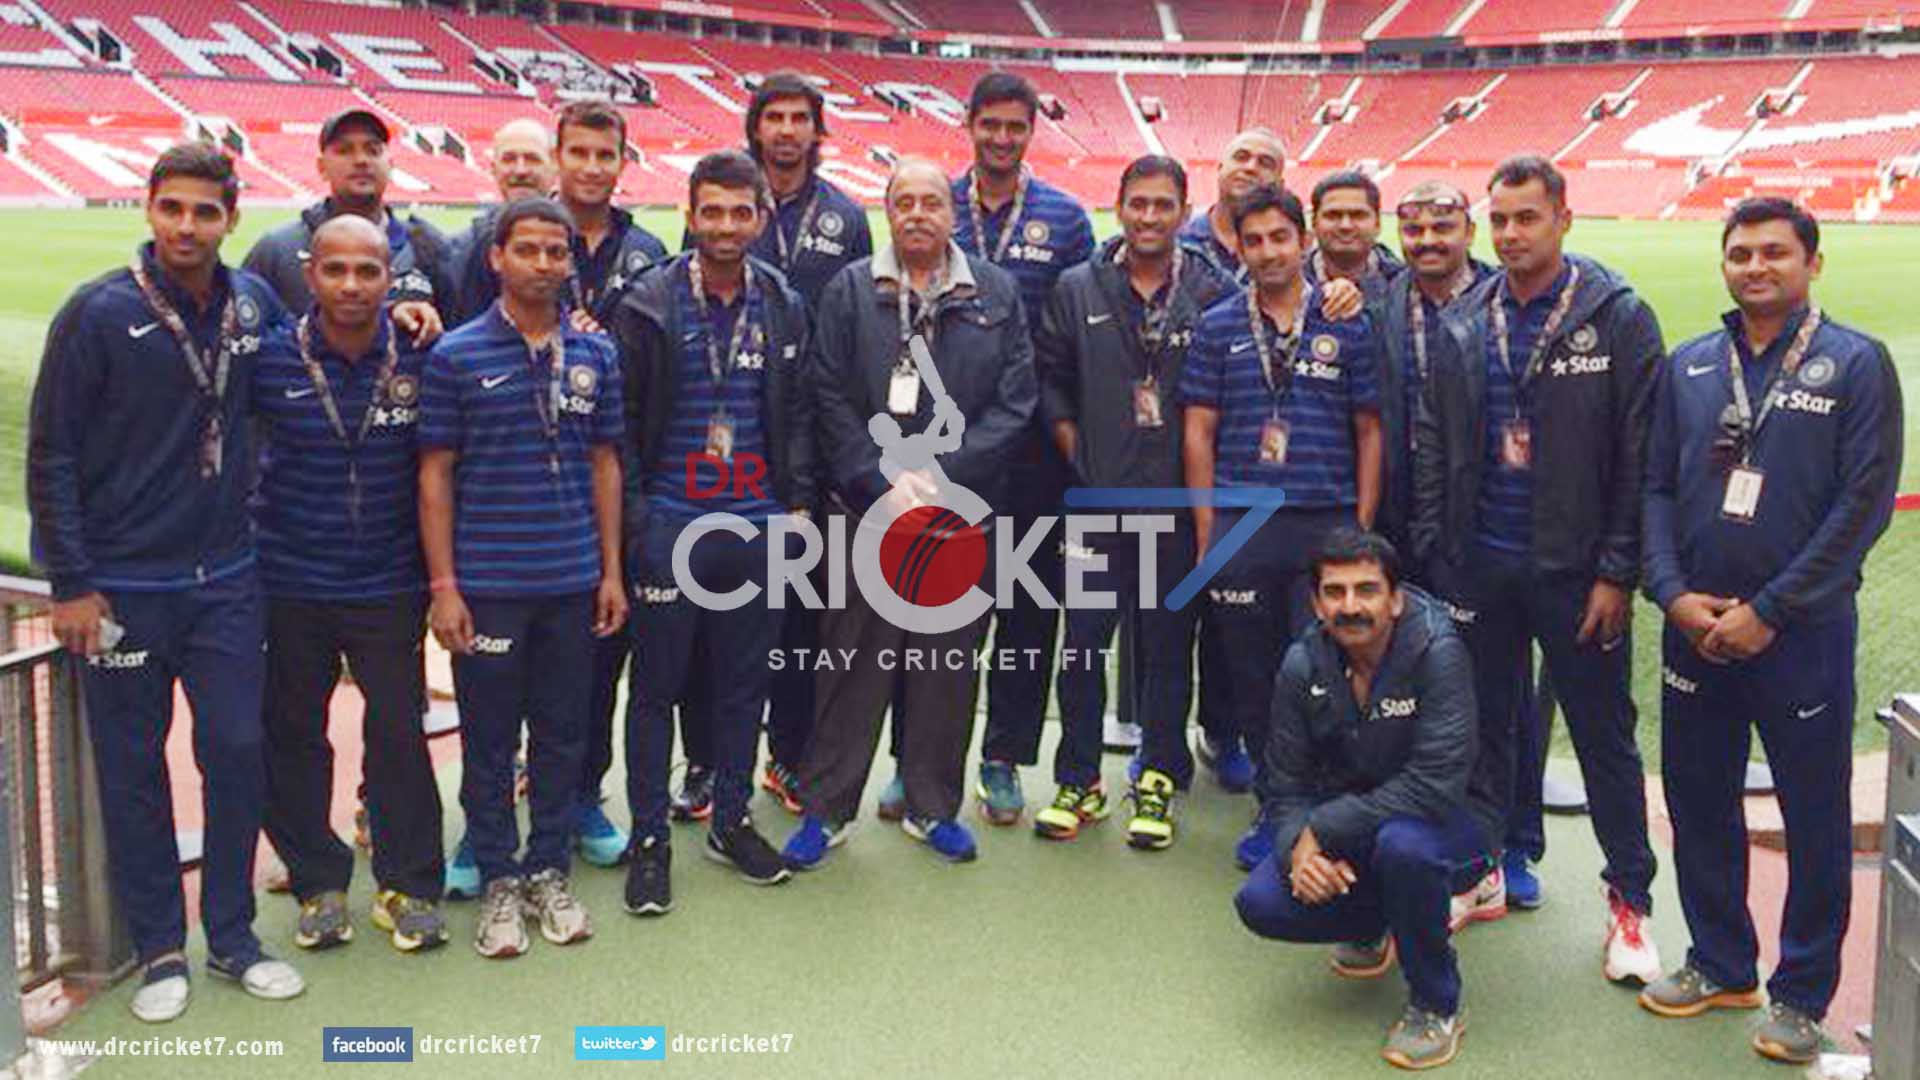 Team India’s visit to Old Trafford